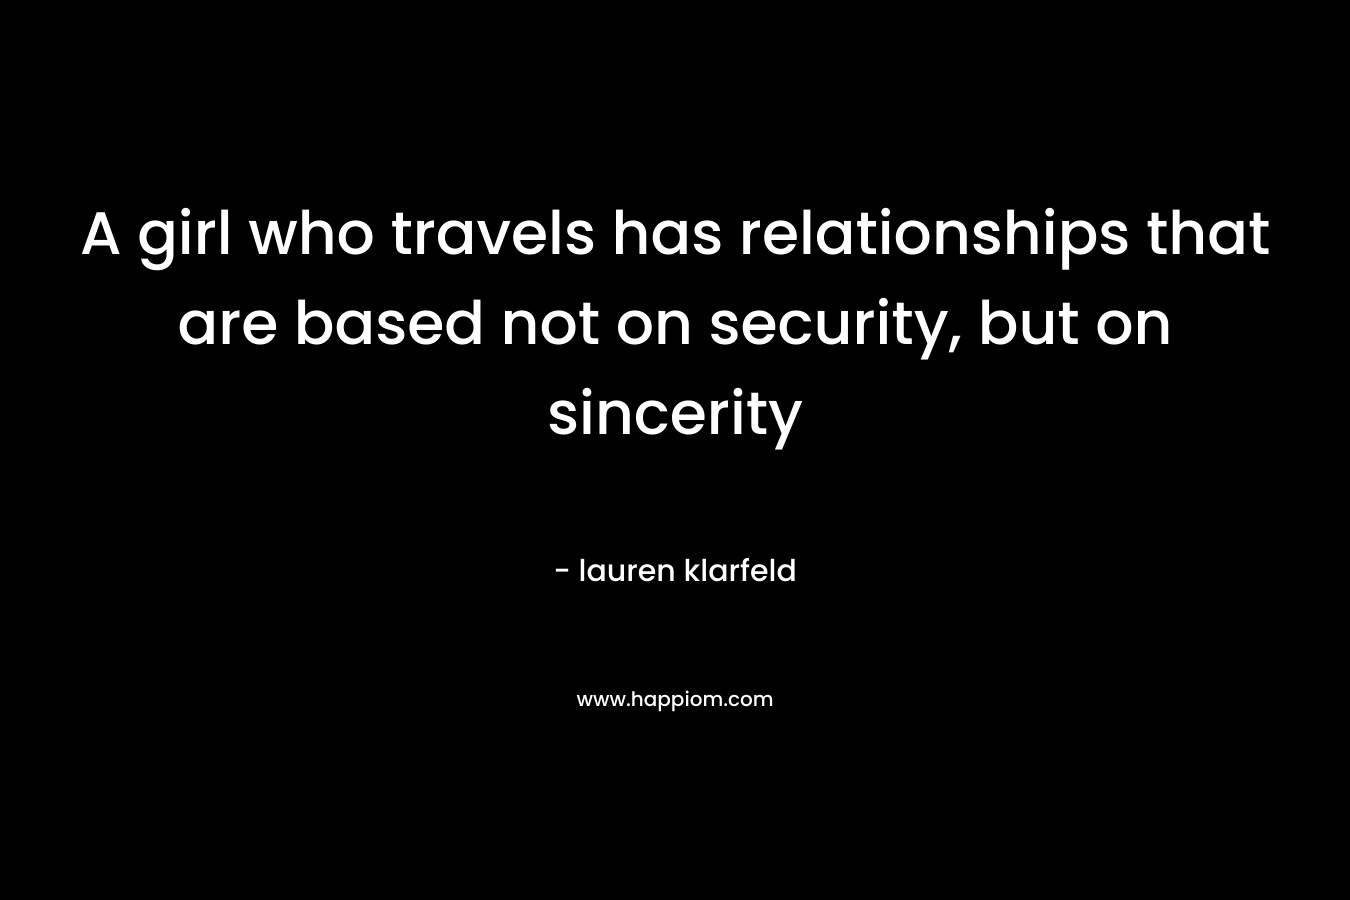 A girl who travels has relationships that are based not on security, but on sincerity – lauren klarfeld